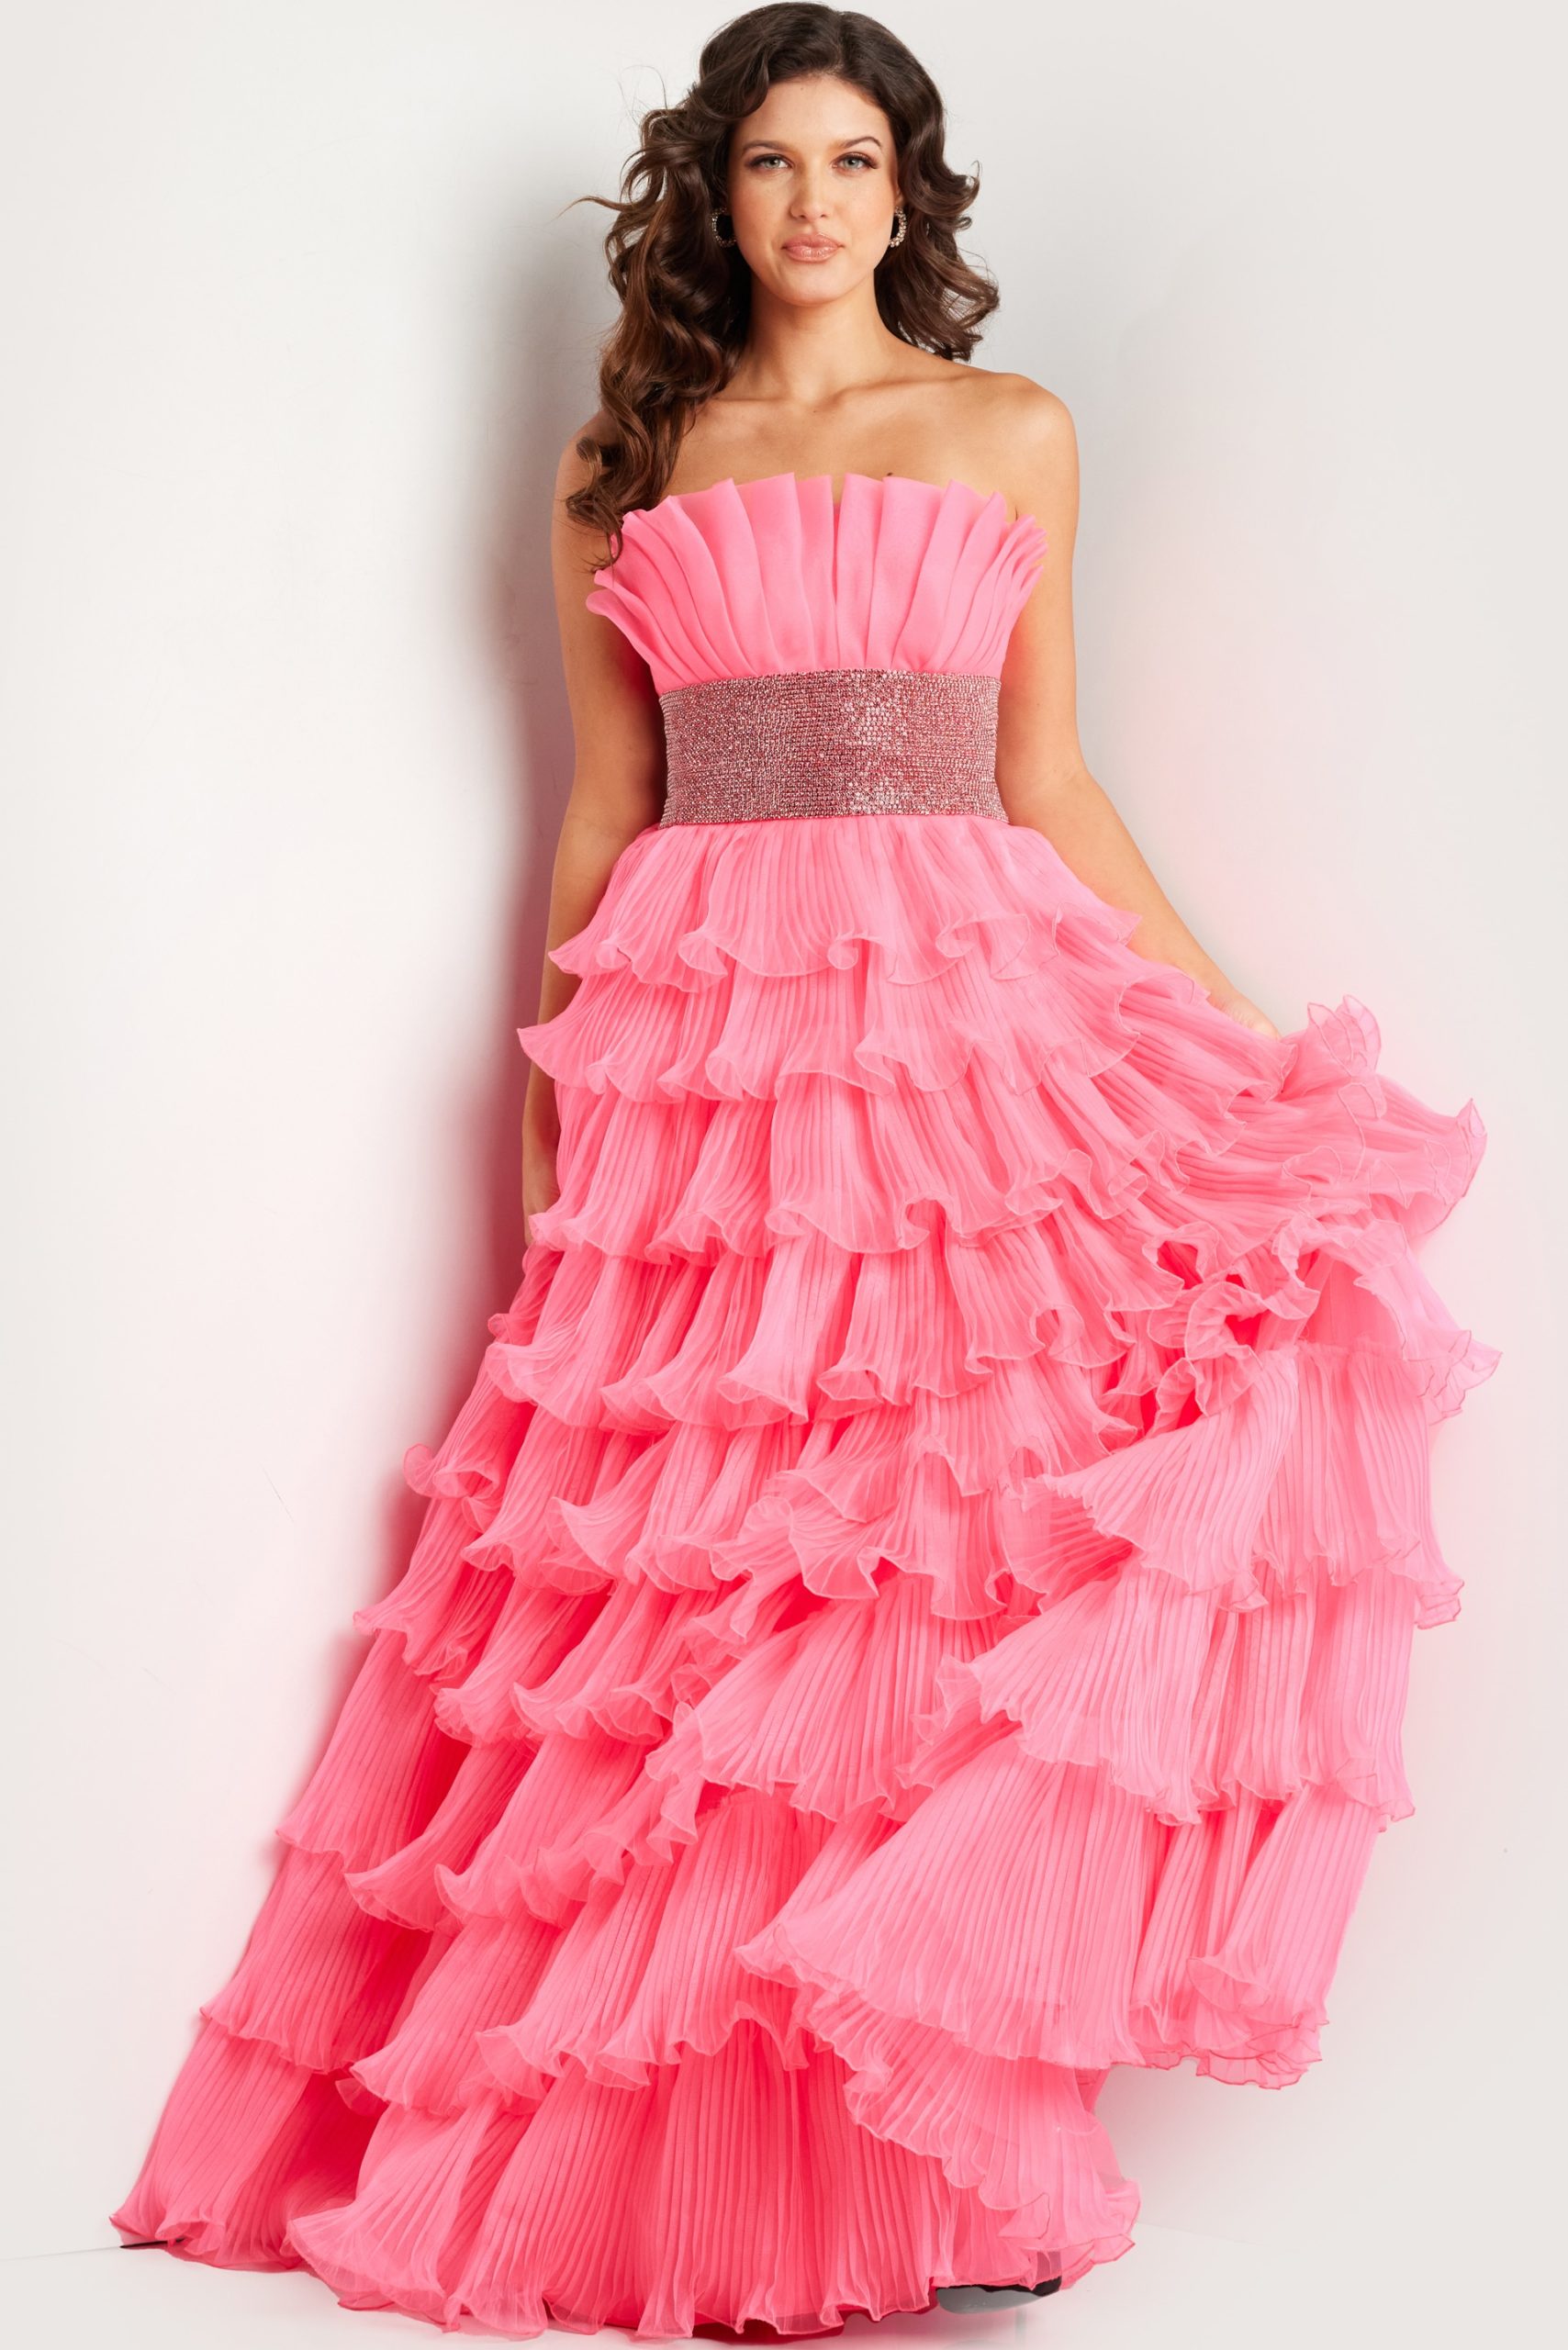 Hot Pink Strapless Ruched Dress 26314